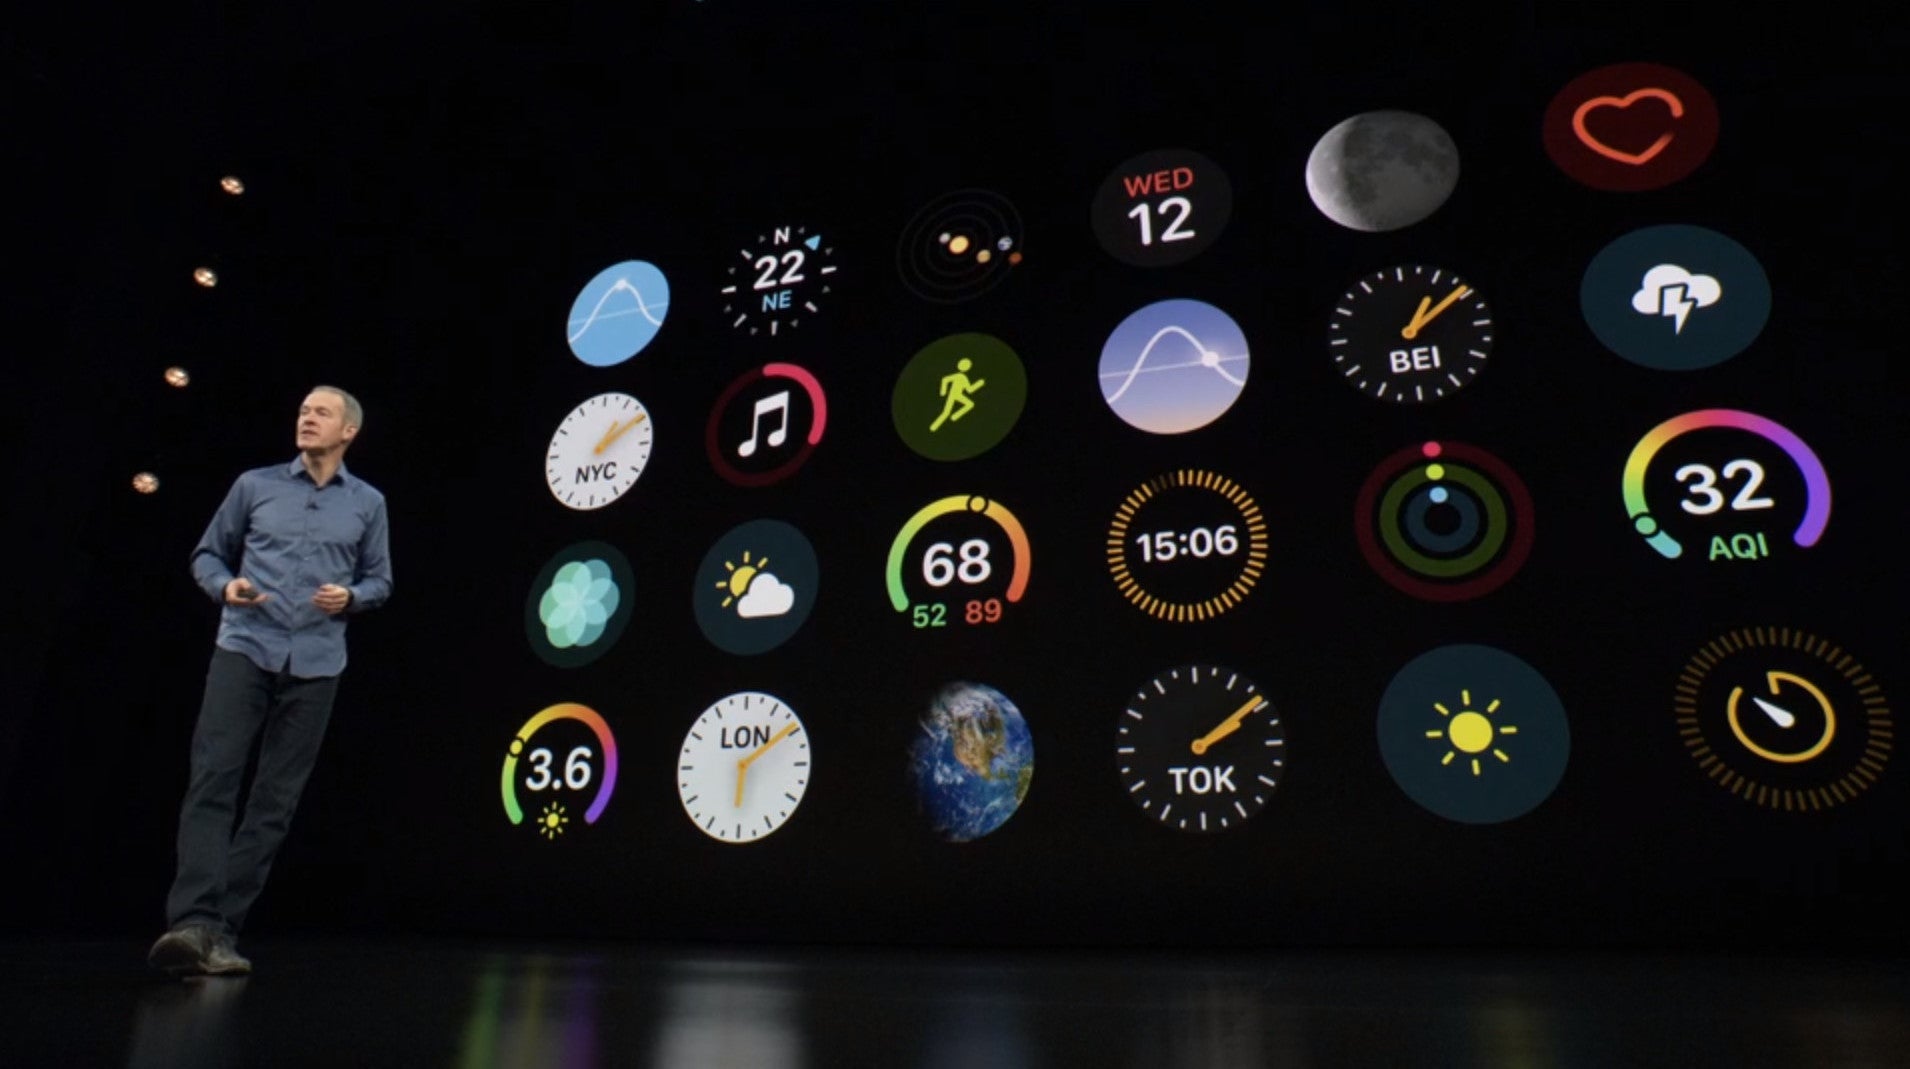 Apple Watch Series 4 is official with bigger screen, faster processor, redesigned crown